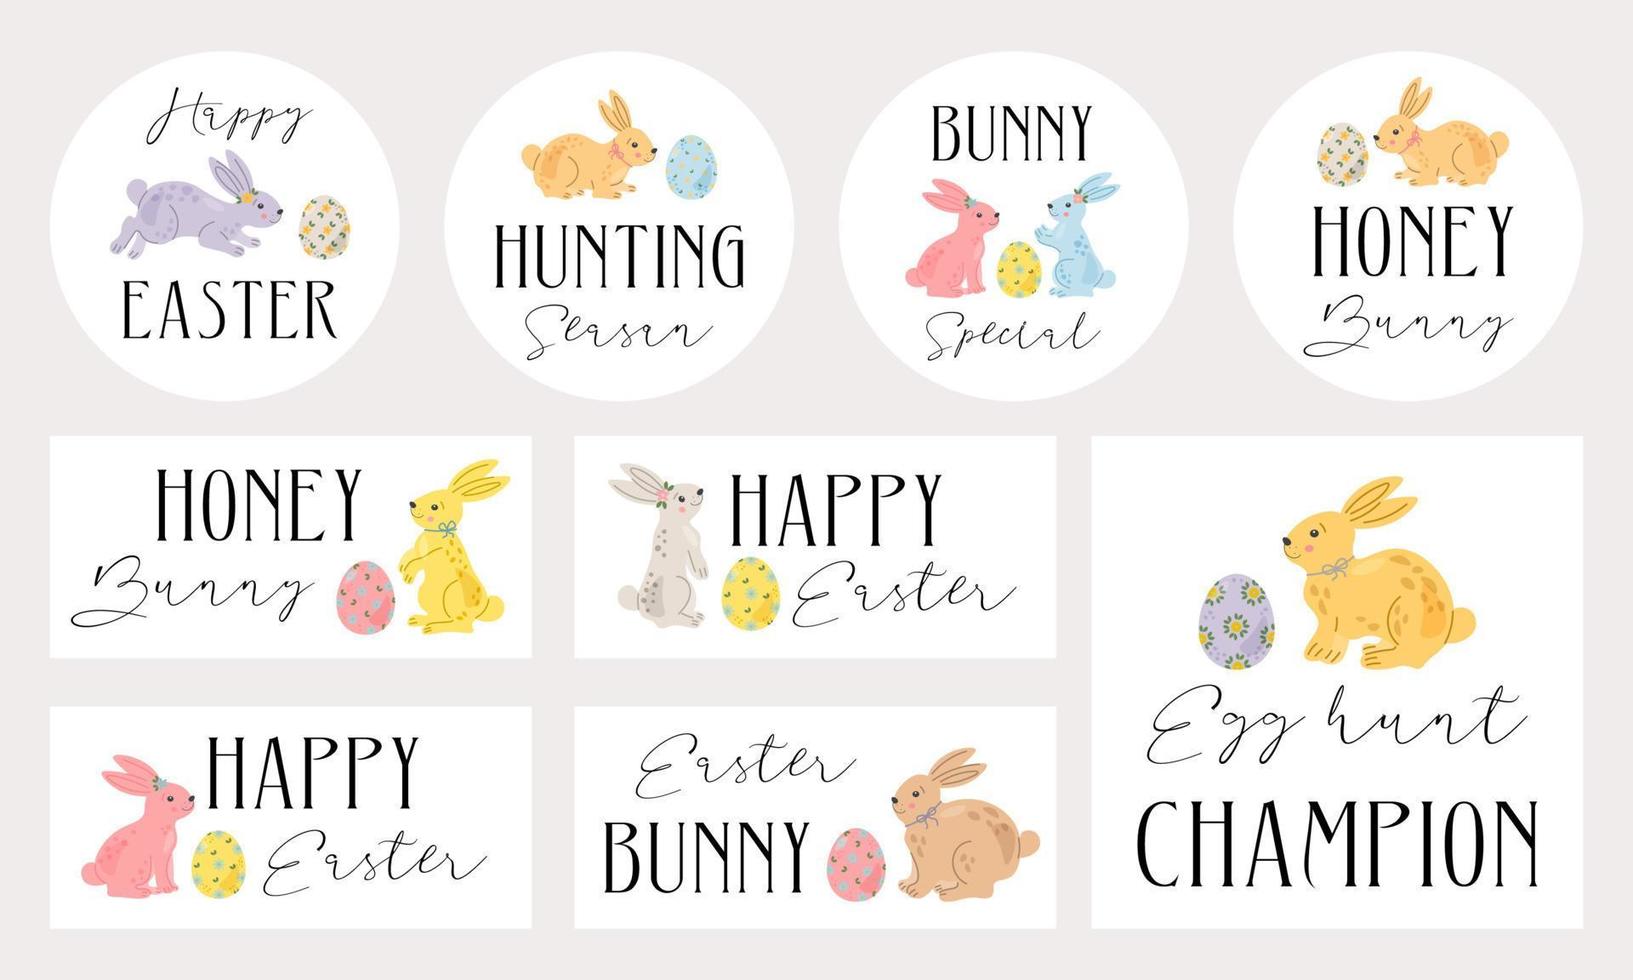 Easter badges and labels vector design elements set with cute bunnies and eggs. Lettering Happy Easter, Eggs hunt, Happy Easter.